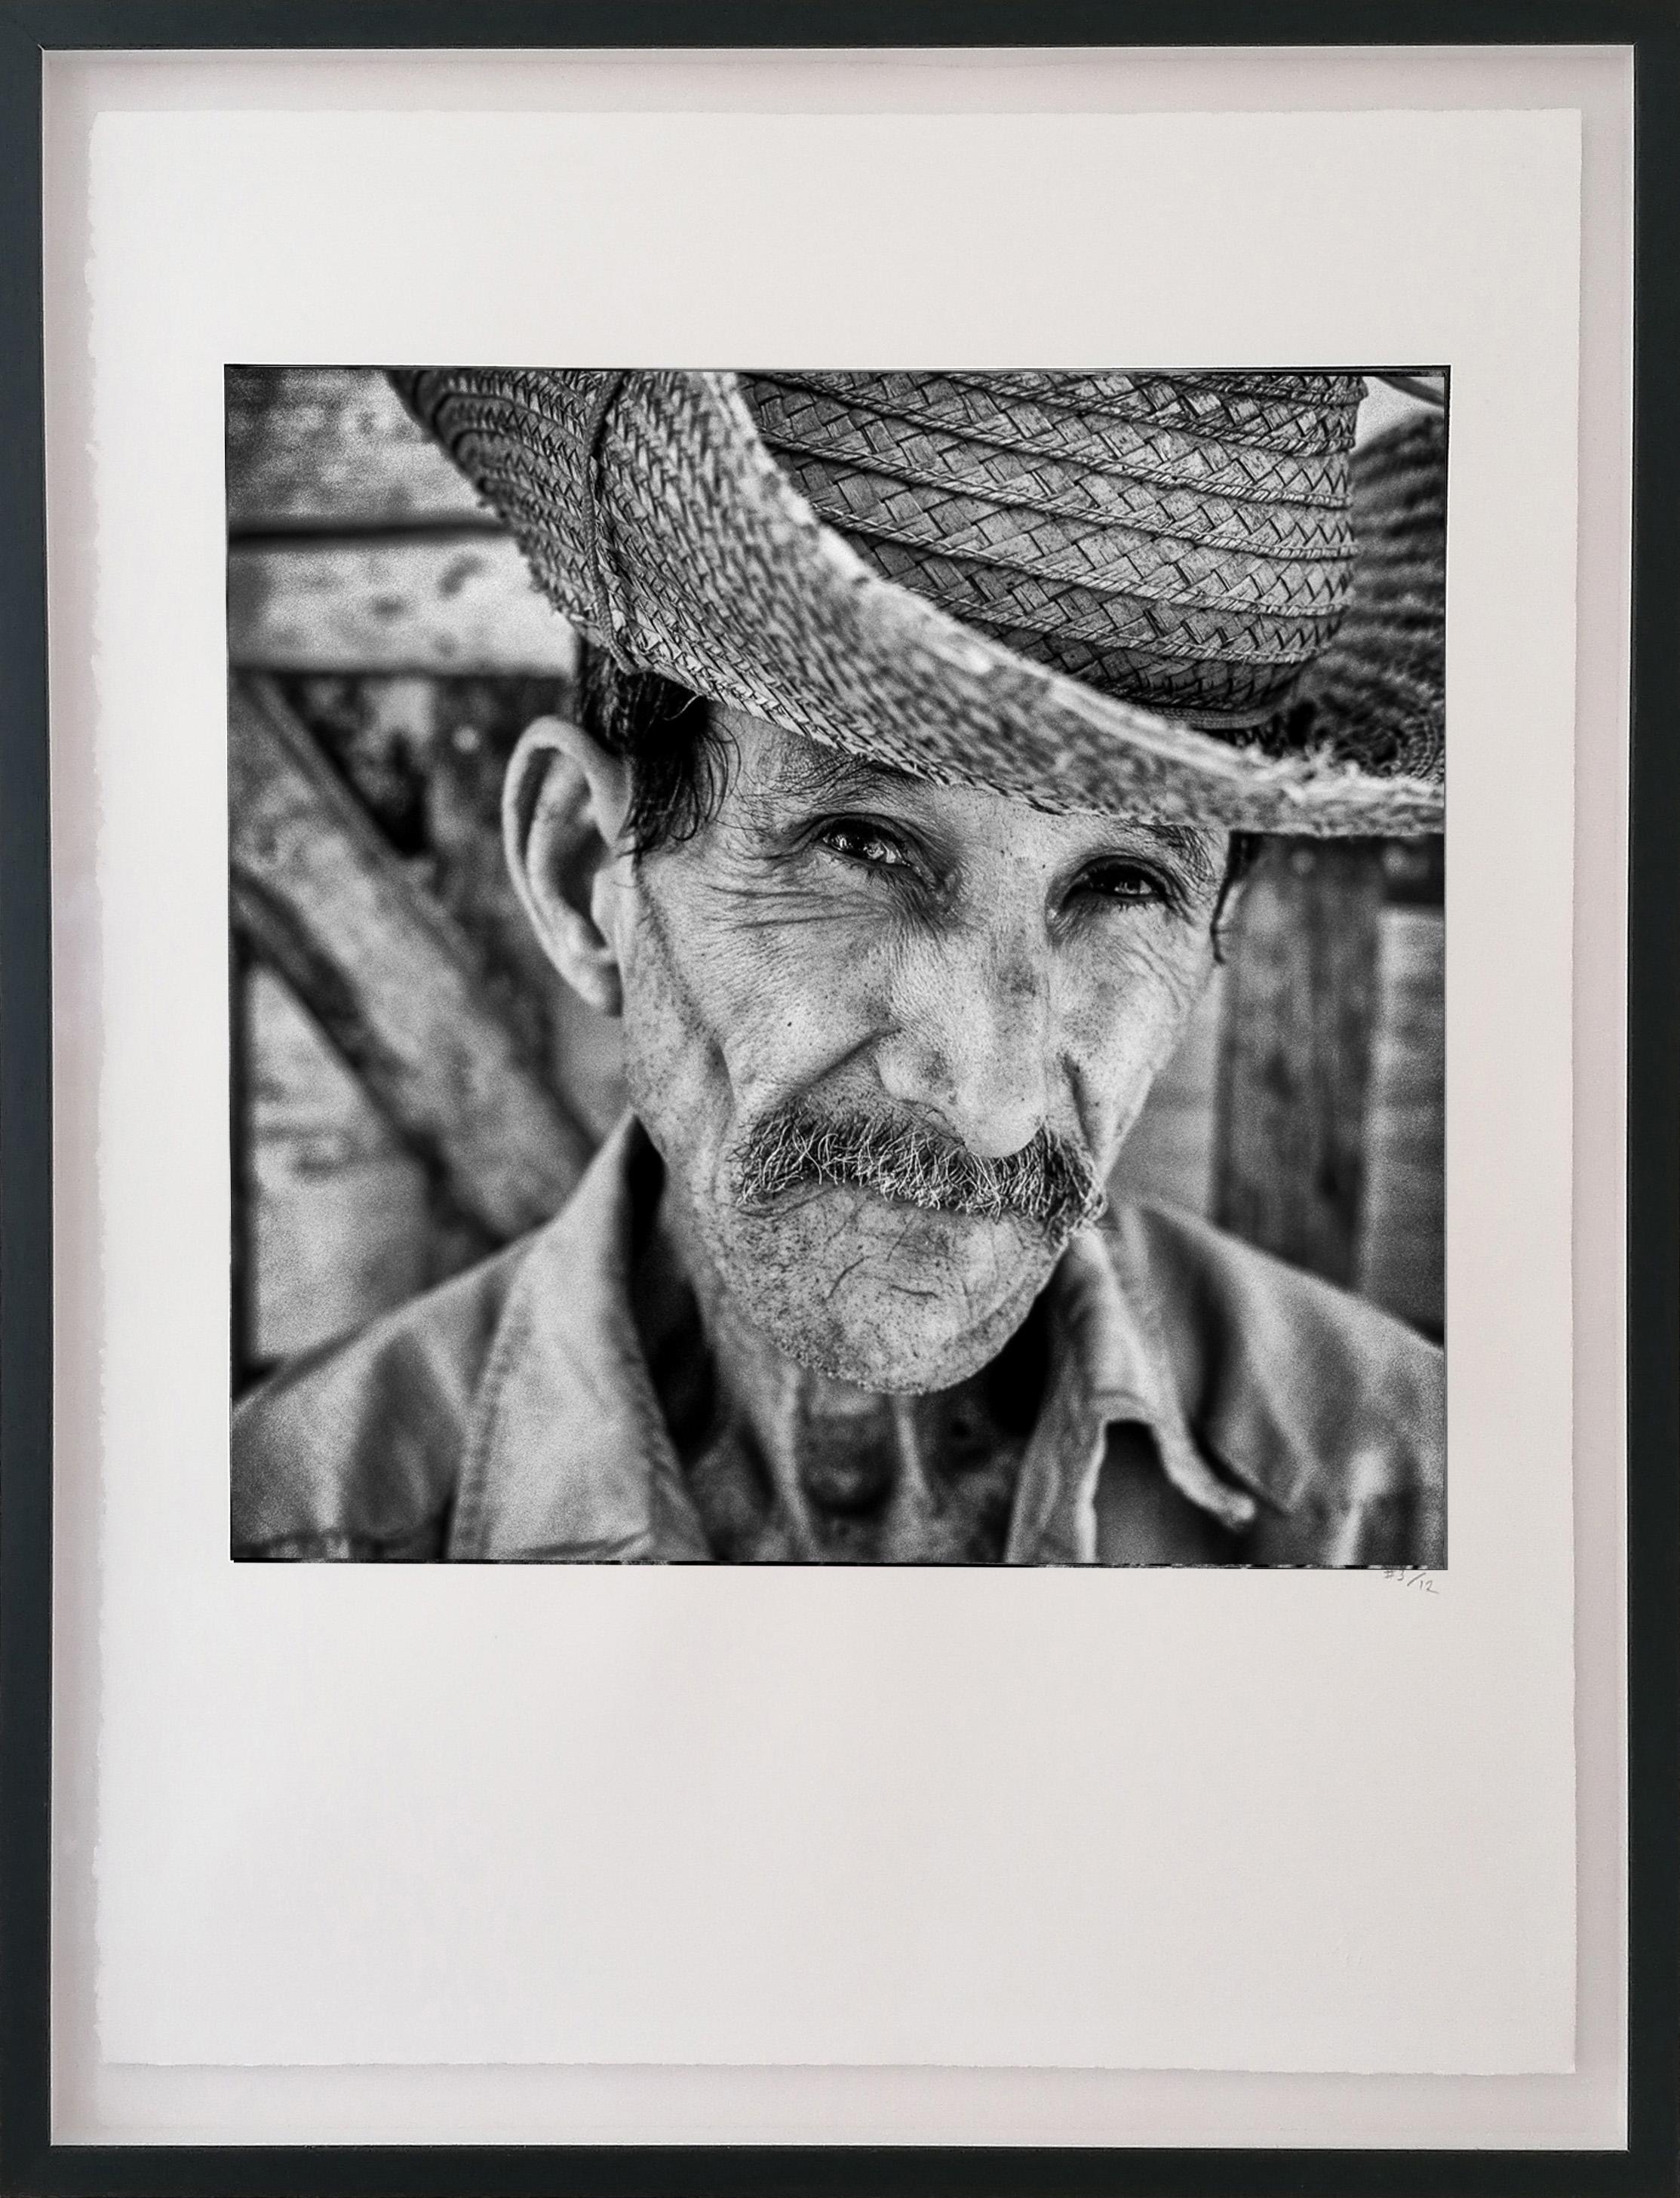 The Viñales valley in western Cuba is a place of stunning beauty where perhaps the finest tobacco leaves in the world are grown. The tobacco farmers live hard but proud lives.

The Spirit of the Revolution series documents the generation of Cubans